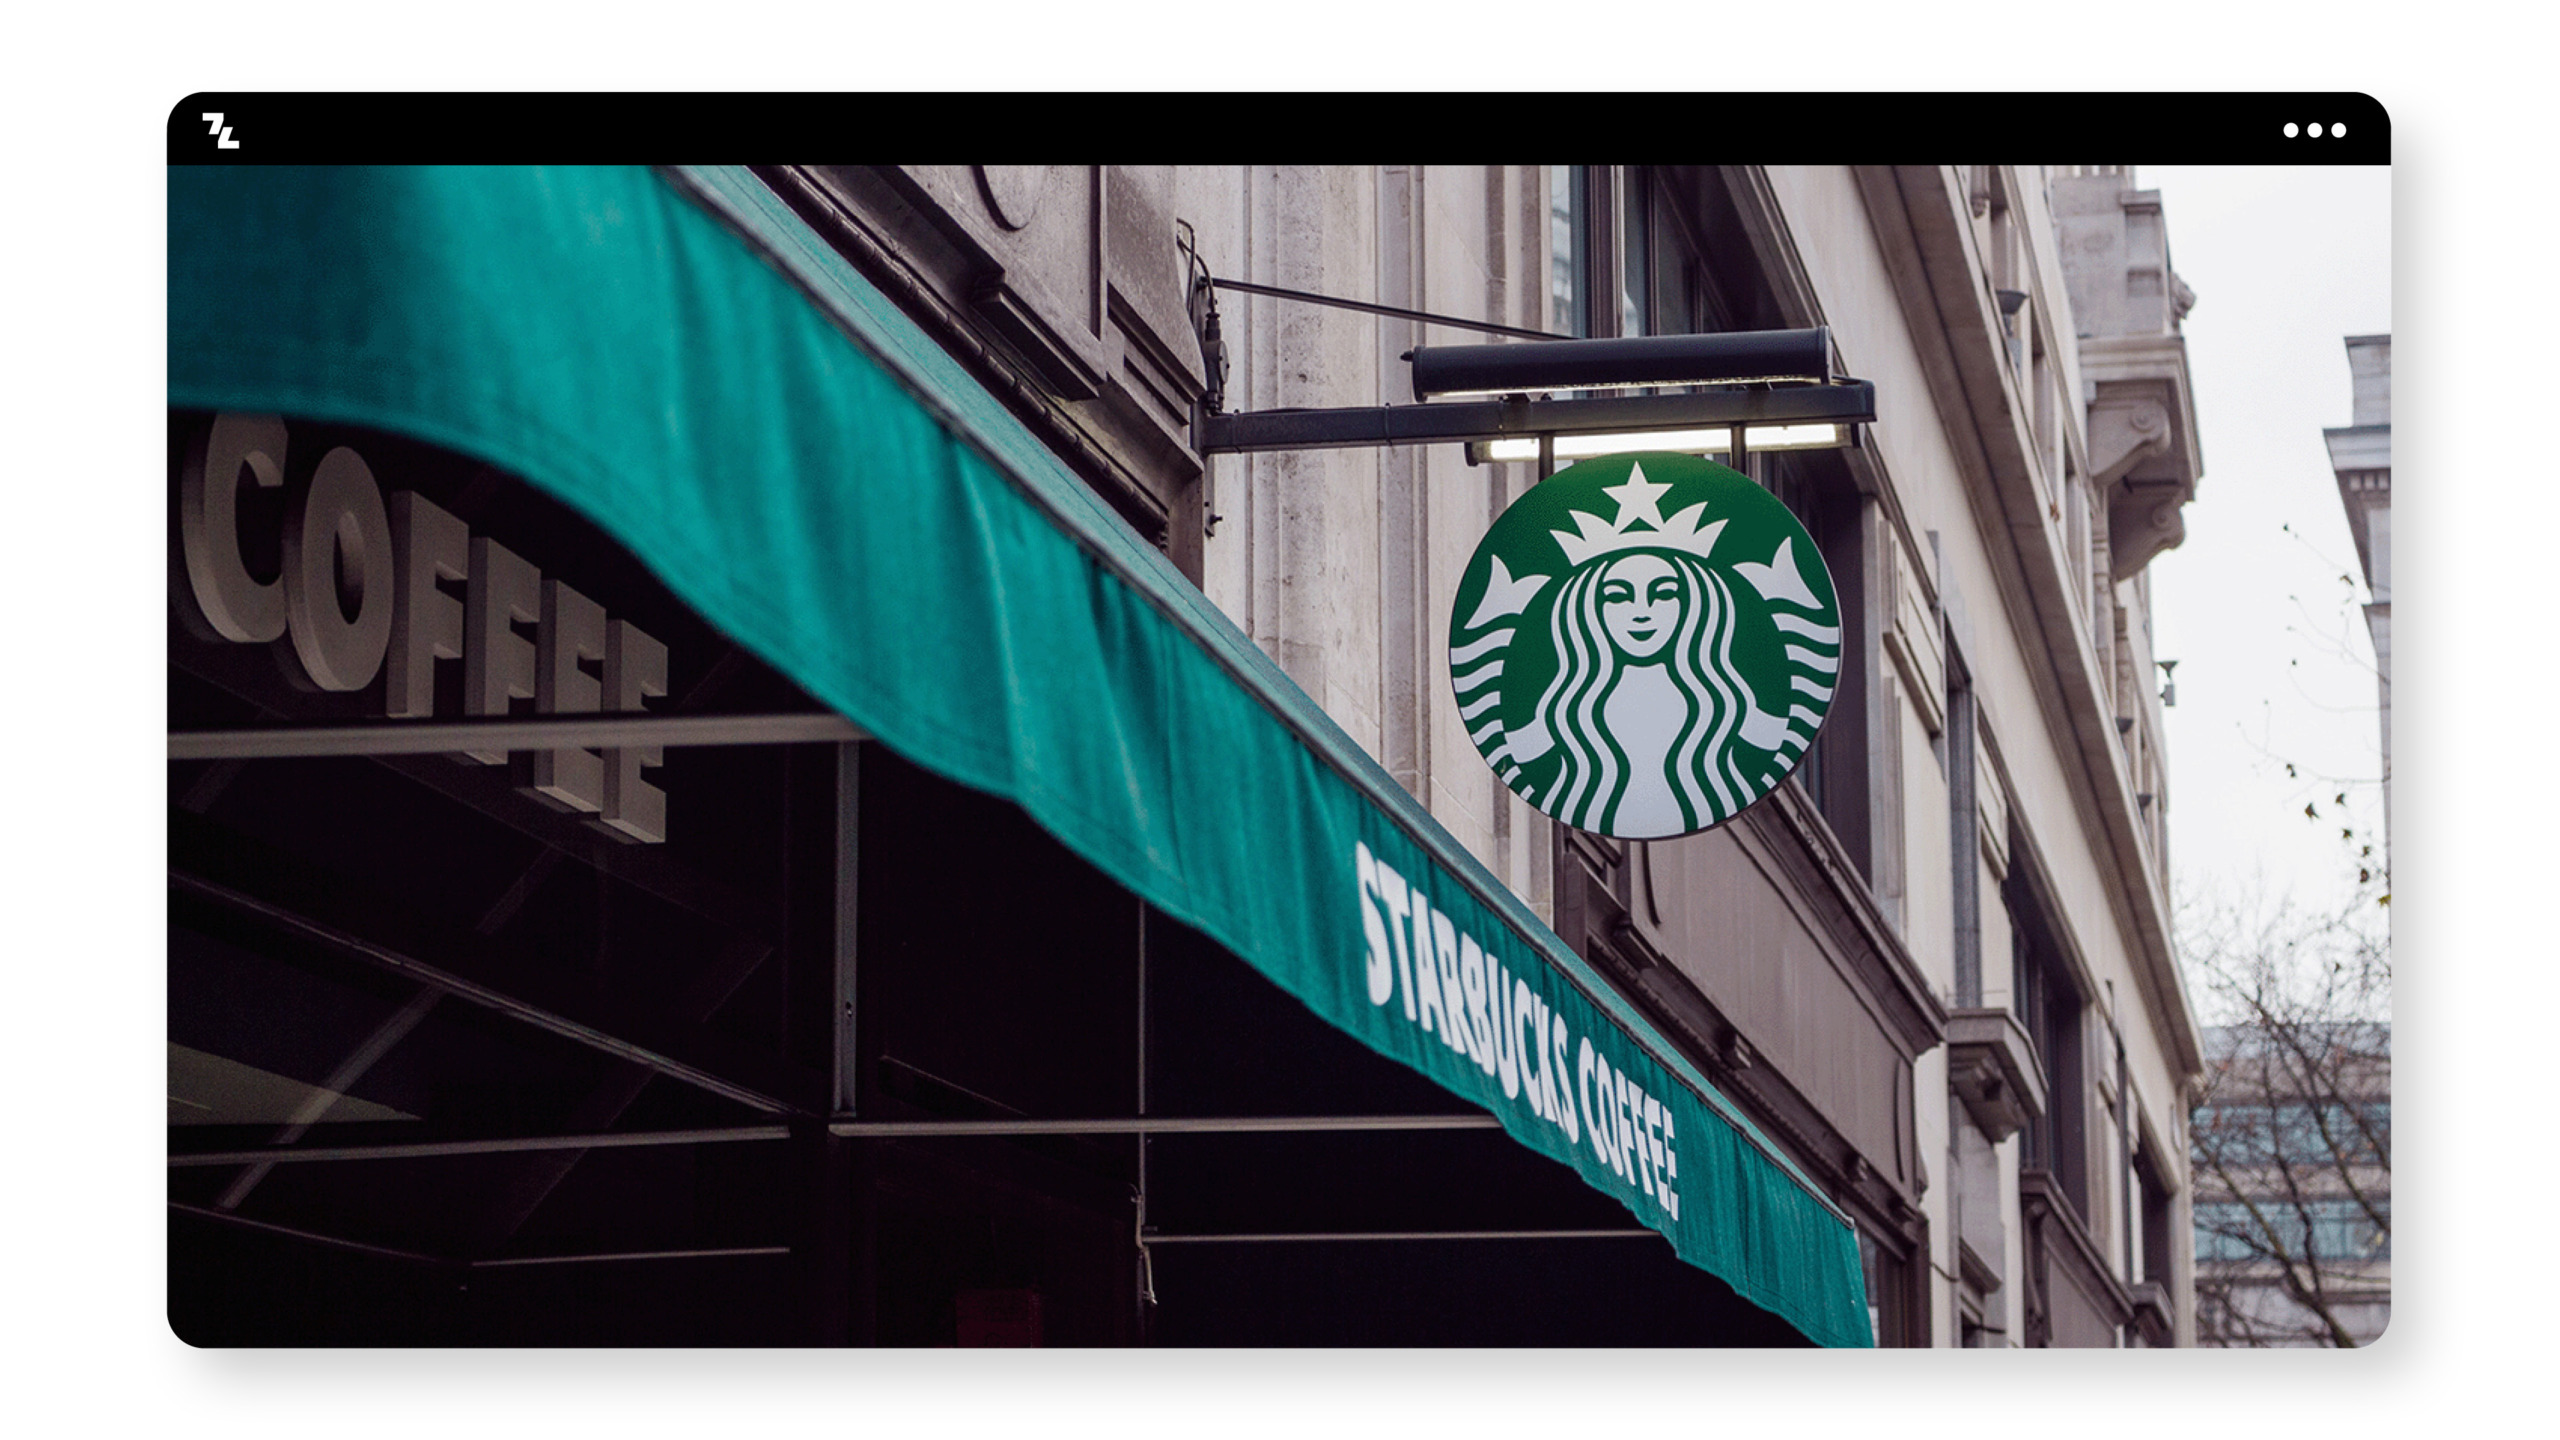 A building with a Starbucks sign exemplifying branding.